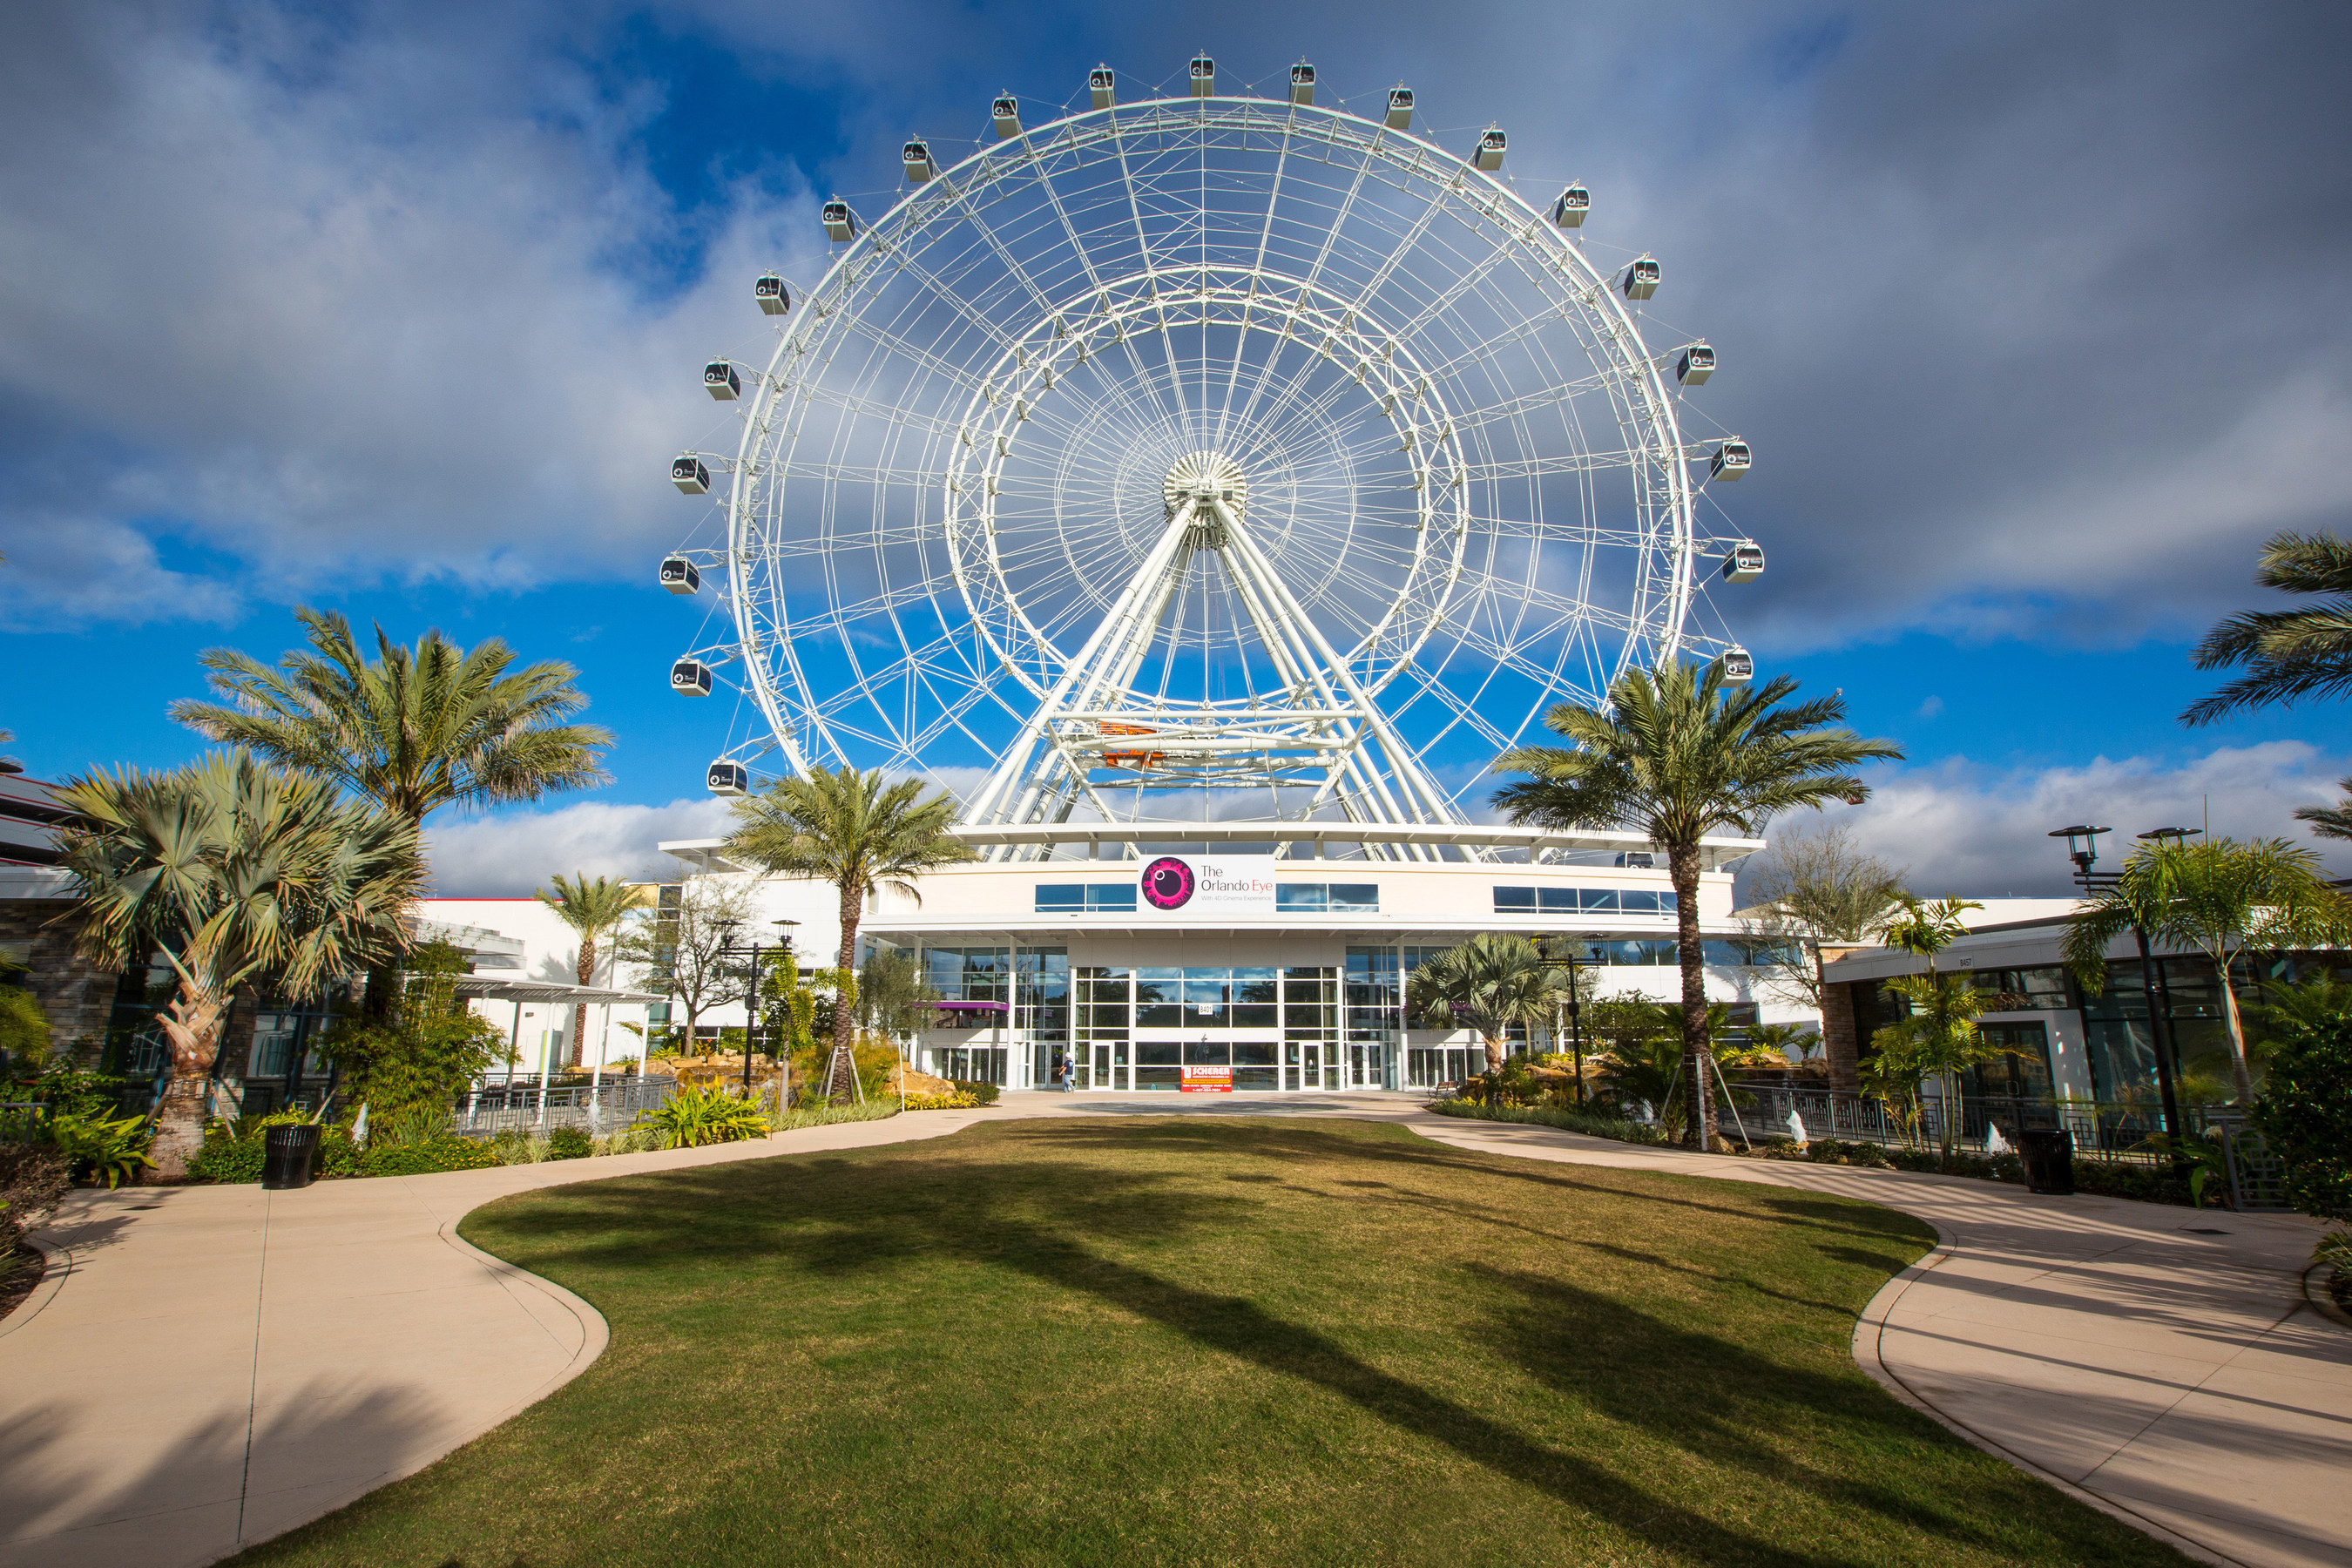 The 400-foot-tall Orlando Eye stands at the center of I-drive 360.